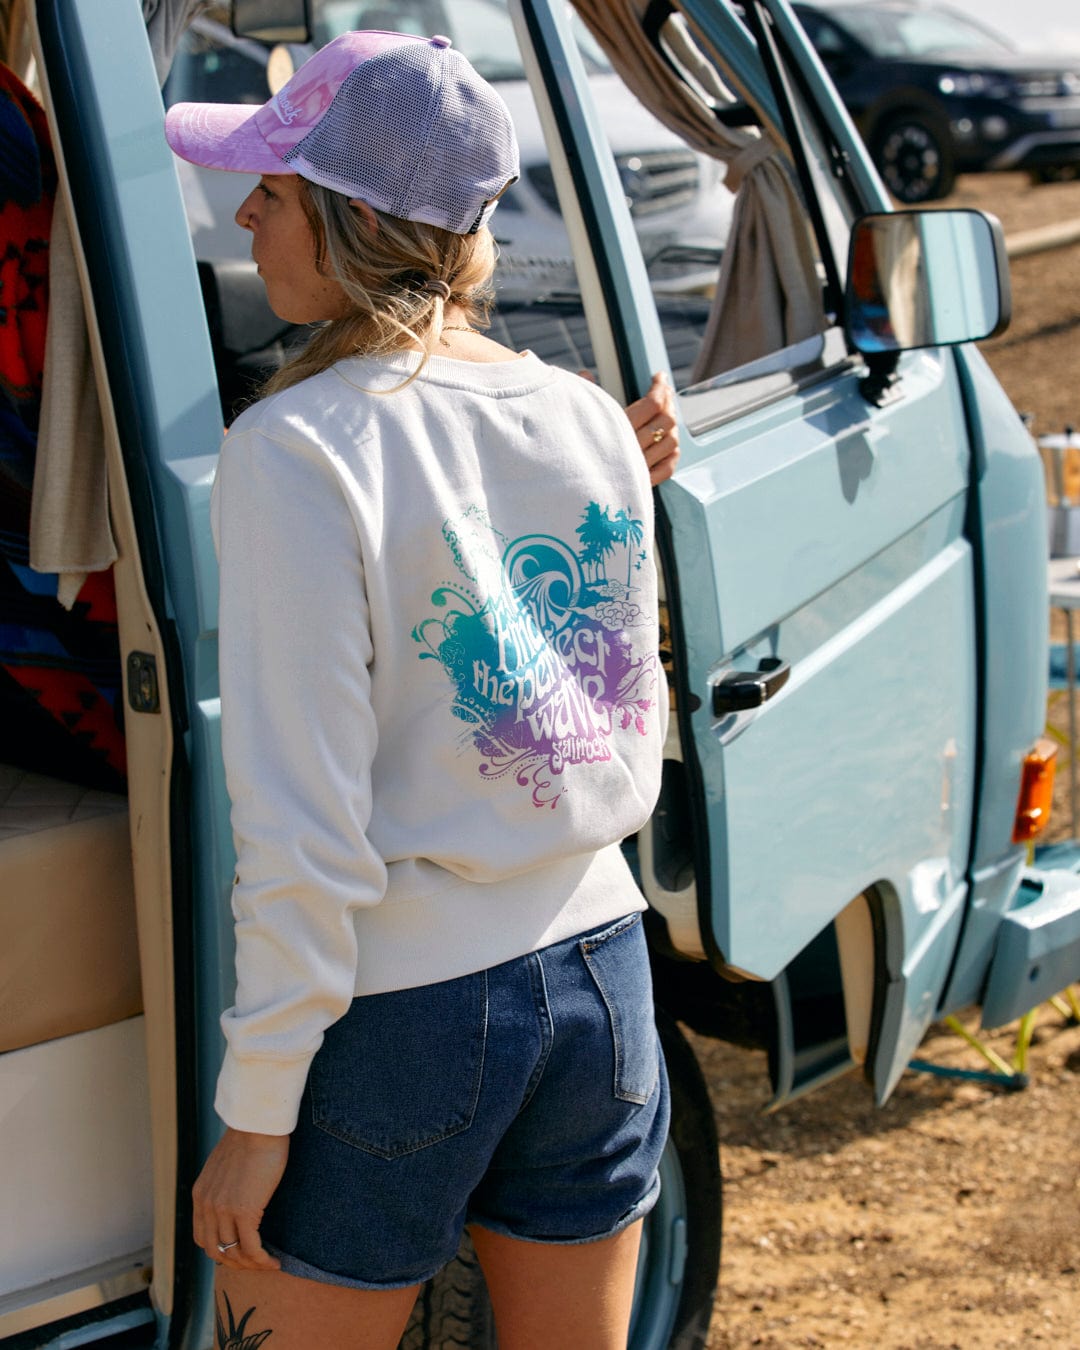 Woman standing by a van wearing a Saltrock crew neck t-shirt with a multi-coloured slogan and denim shorts.